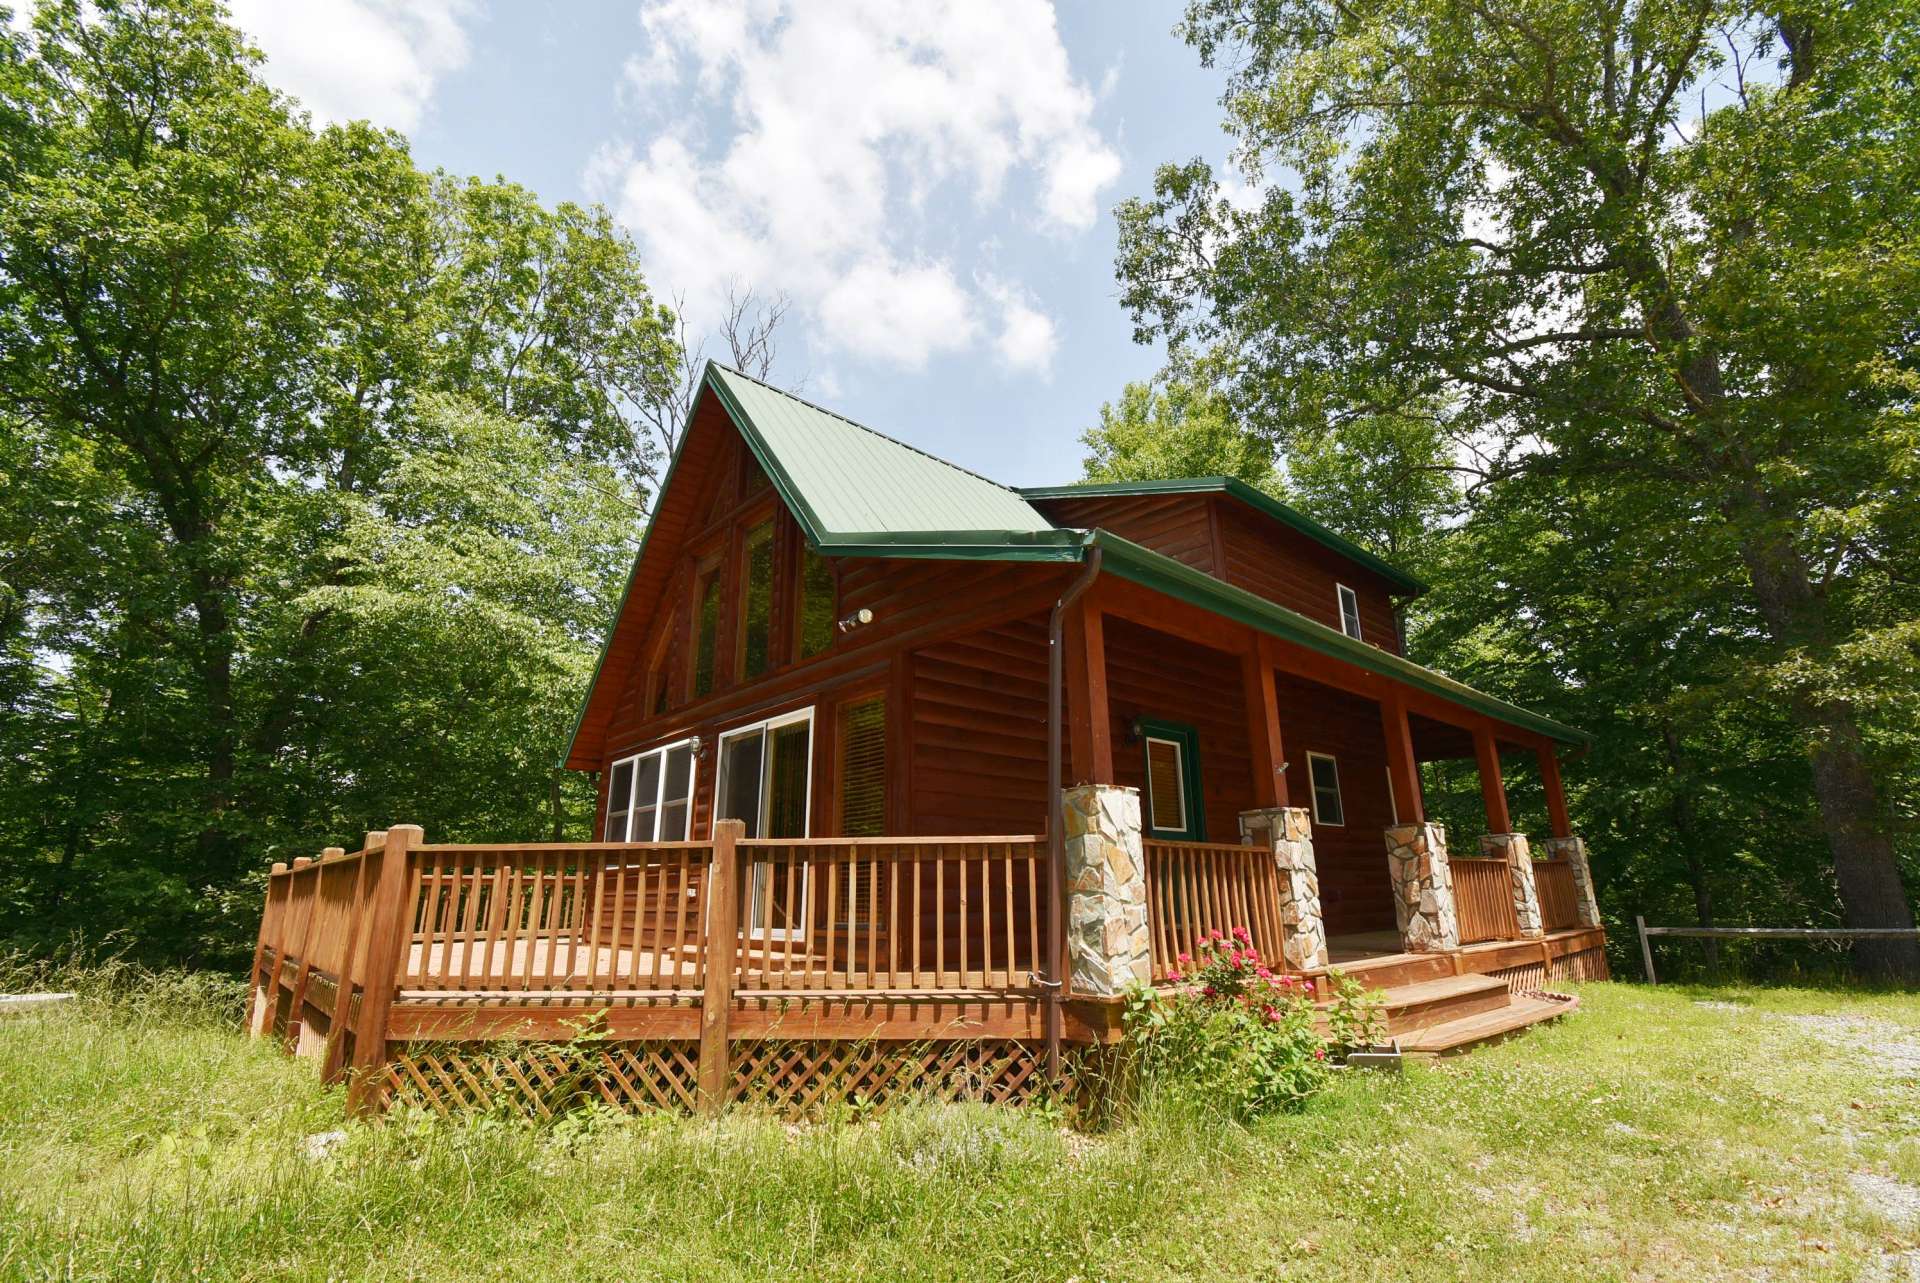 Offered at $210,000, this 2-bedroom, 2.5-bath log sided cabin nestled in a 1.34 acre setting in Deerwood Park, a private community close to the New River, a short drive into Sparta or West Jefferson, is perfect for your NC Mountain retreat and to experience mountain living. H158